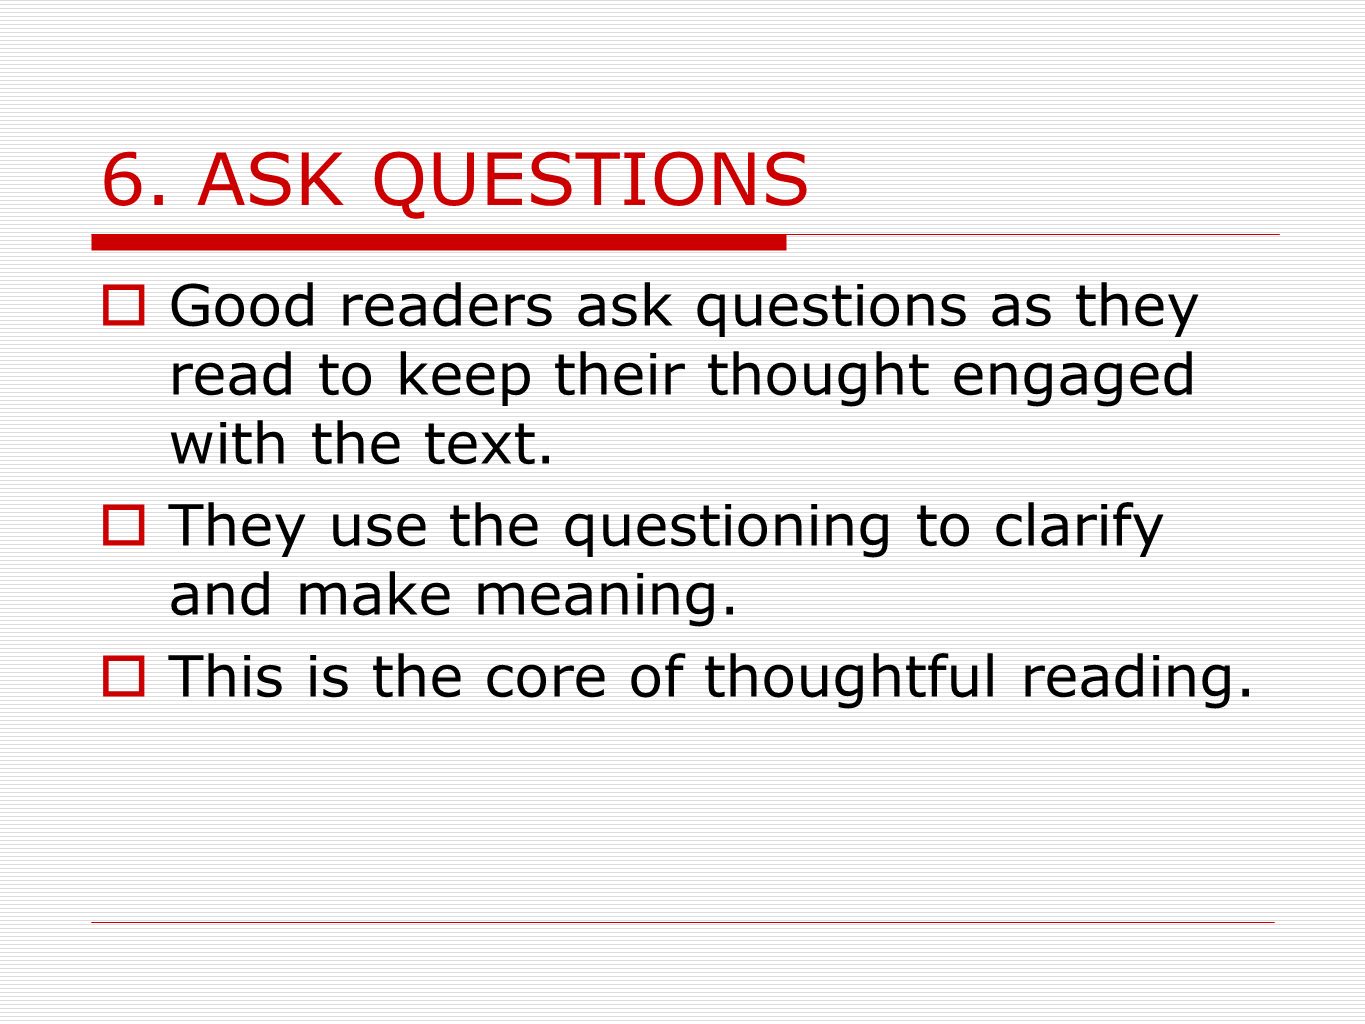 6. ASK QUESTIONS Good readers ask questions as they read to keep their thought engaged with the text.